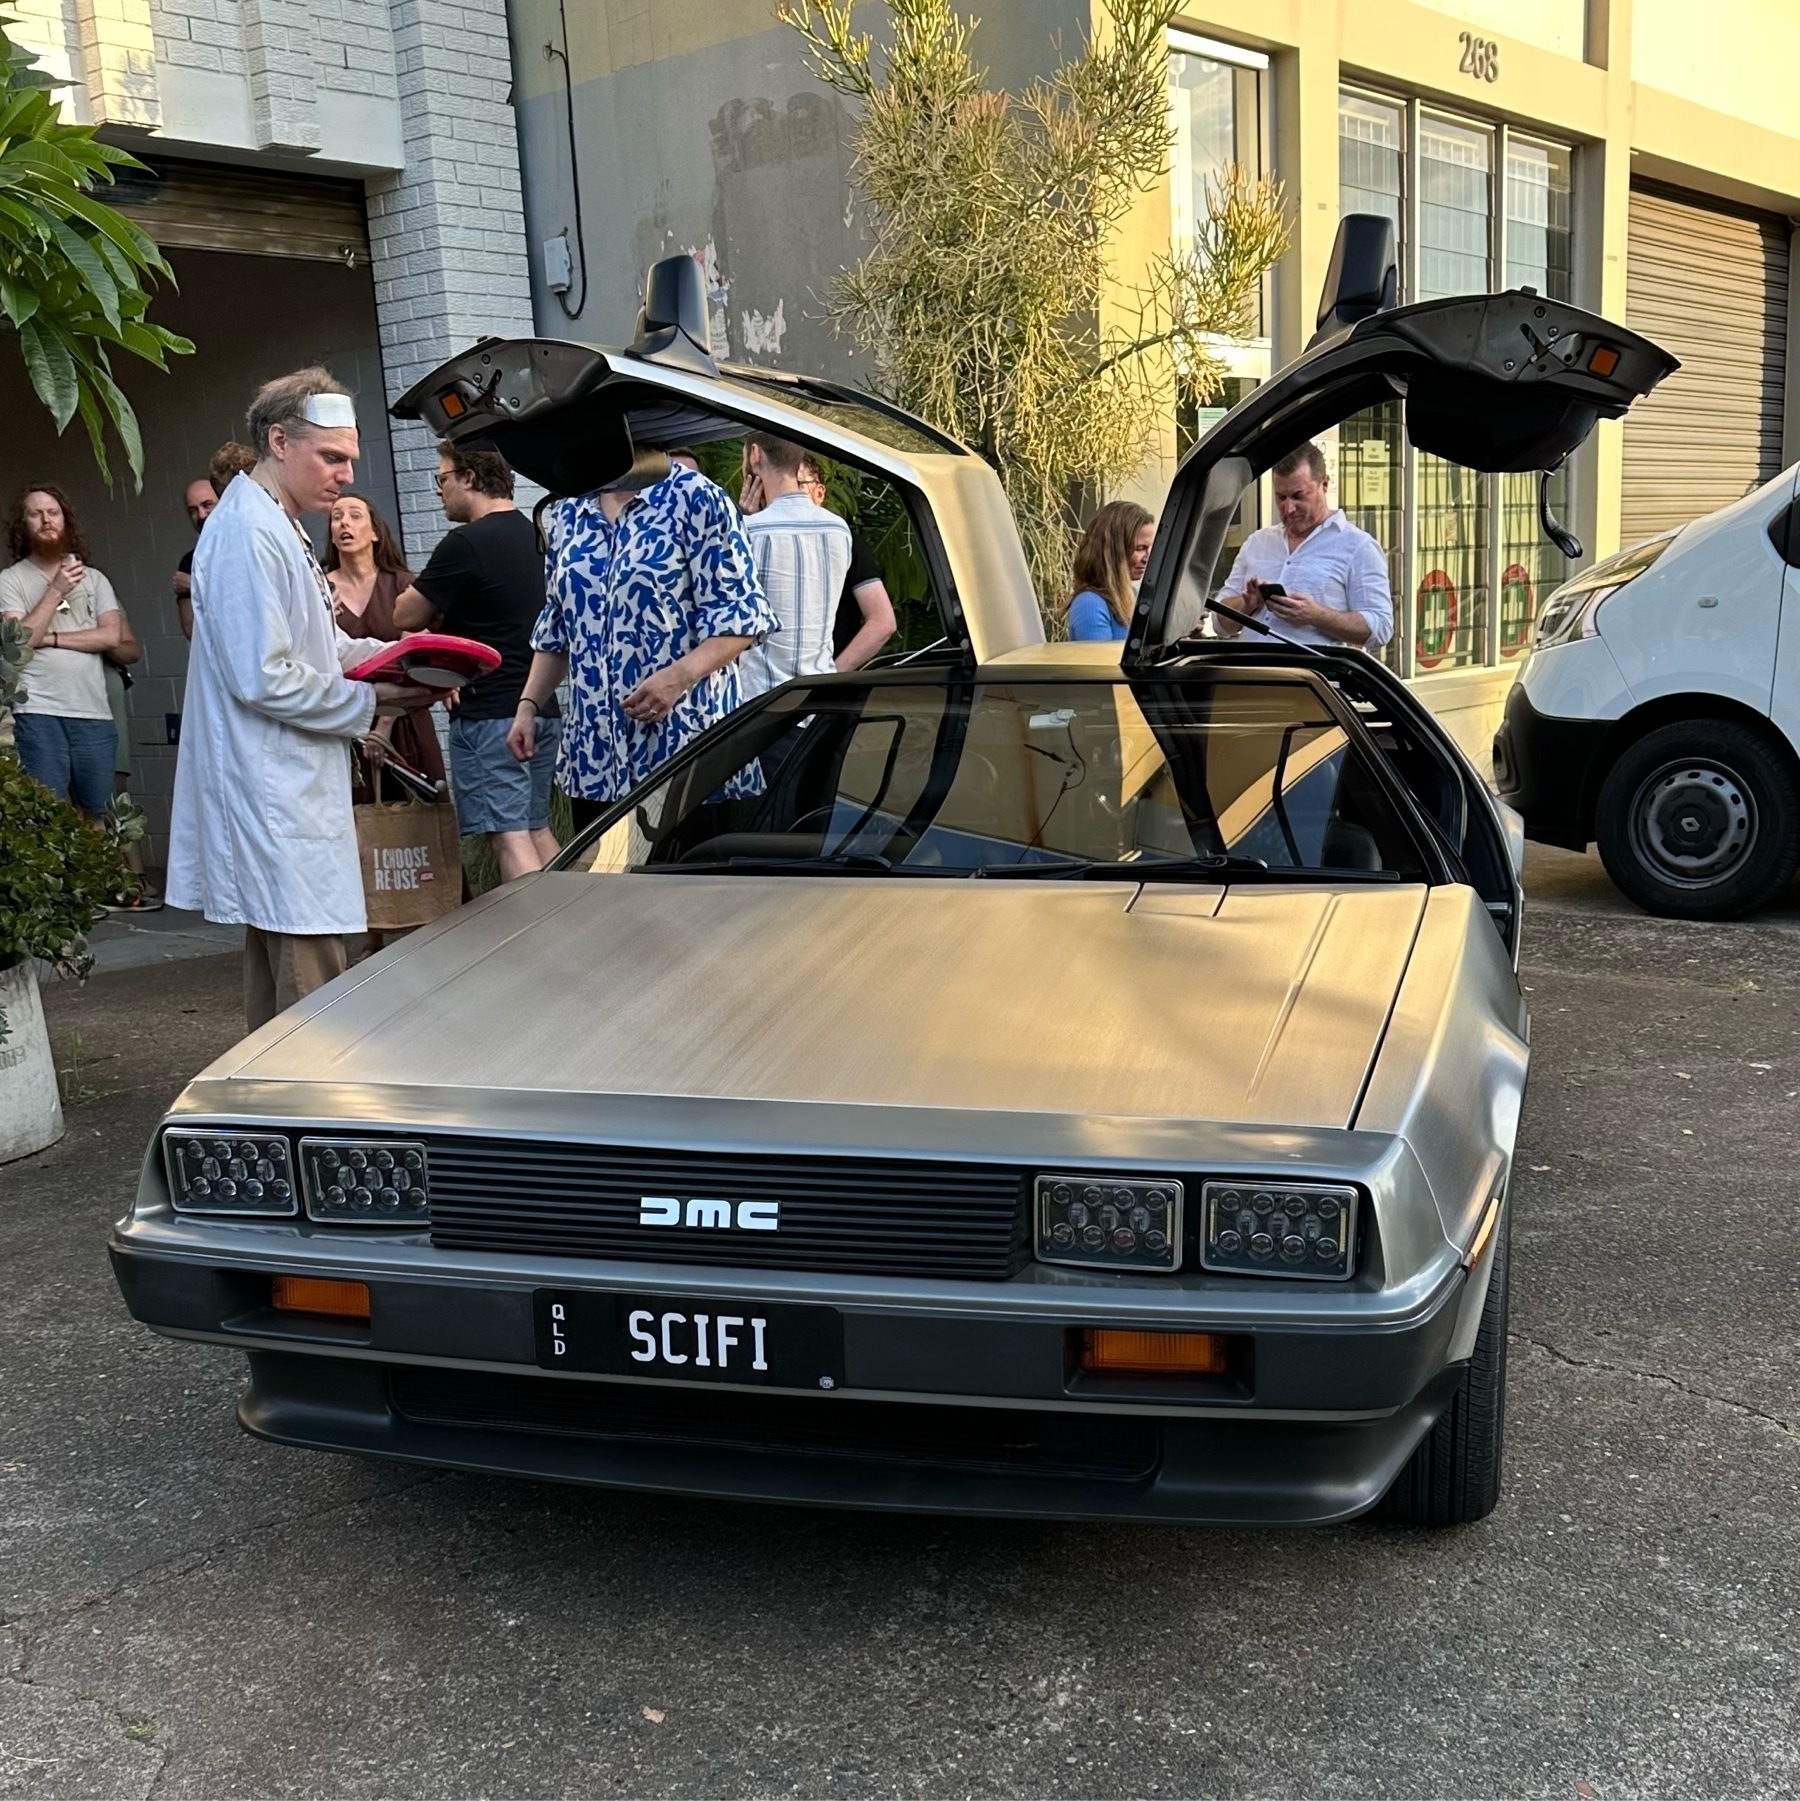 A DeLorean car parked with the winged doors raised up. The licence plate is SCIFI and a man dressed as the Doc from Back to the Future stands nearby.